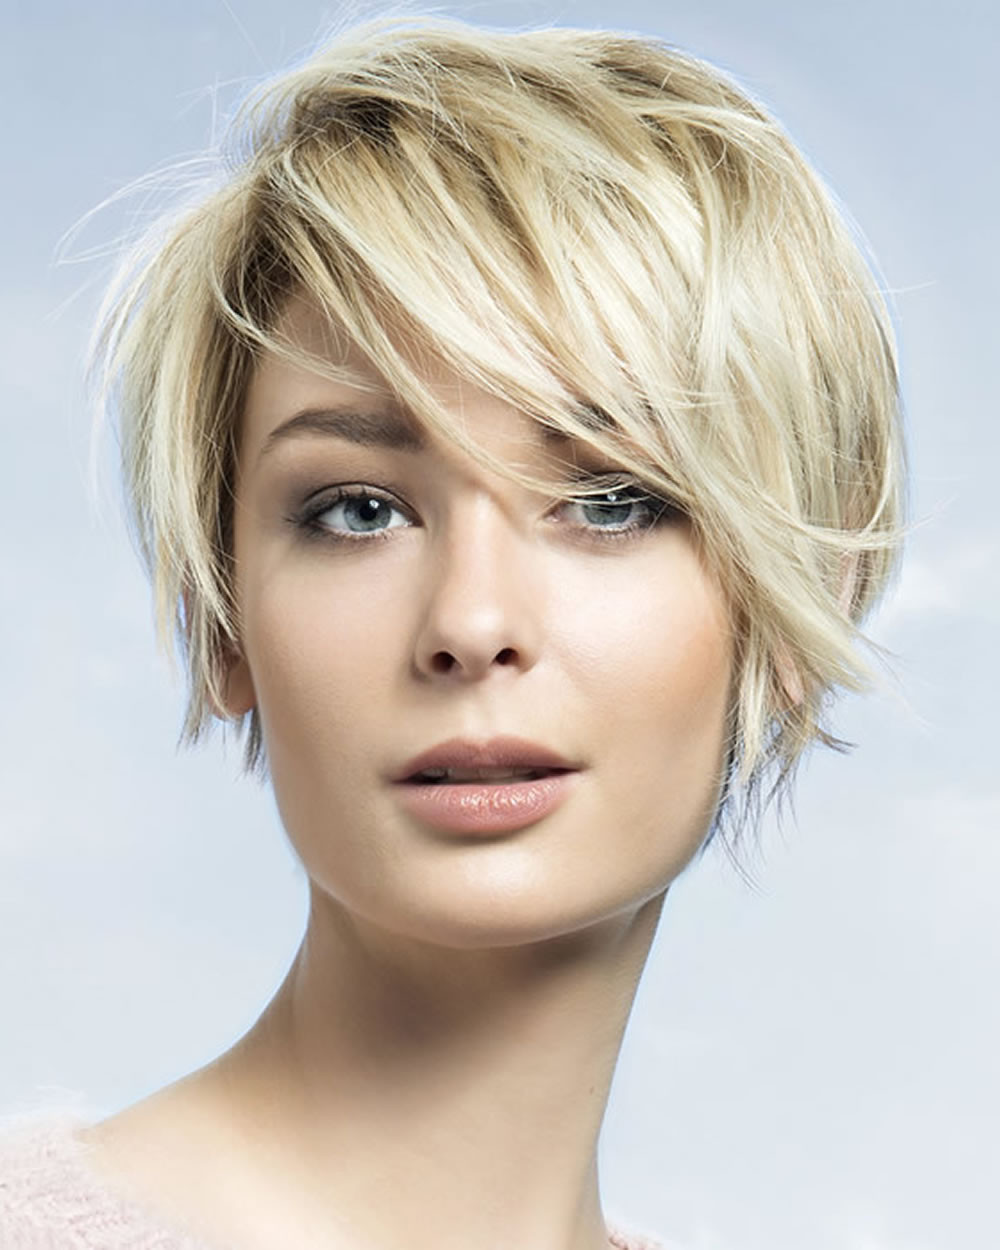 Haircuts For Girls 2019
 Latest Short Haircuts for Women Curly Wavy Straight